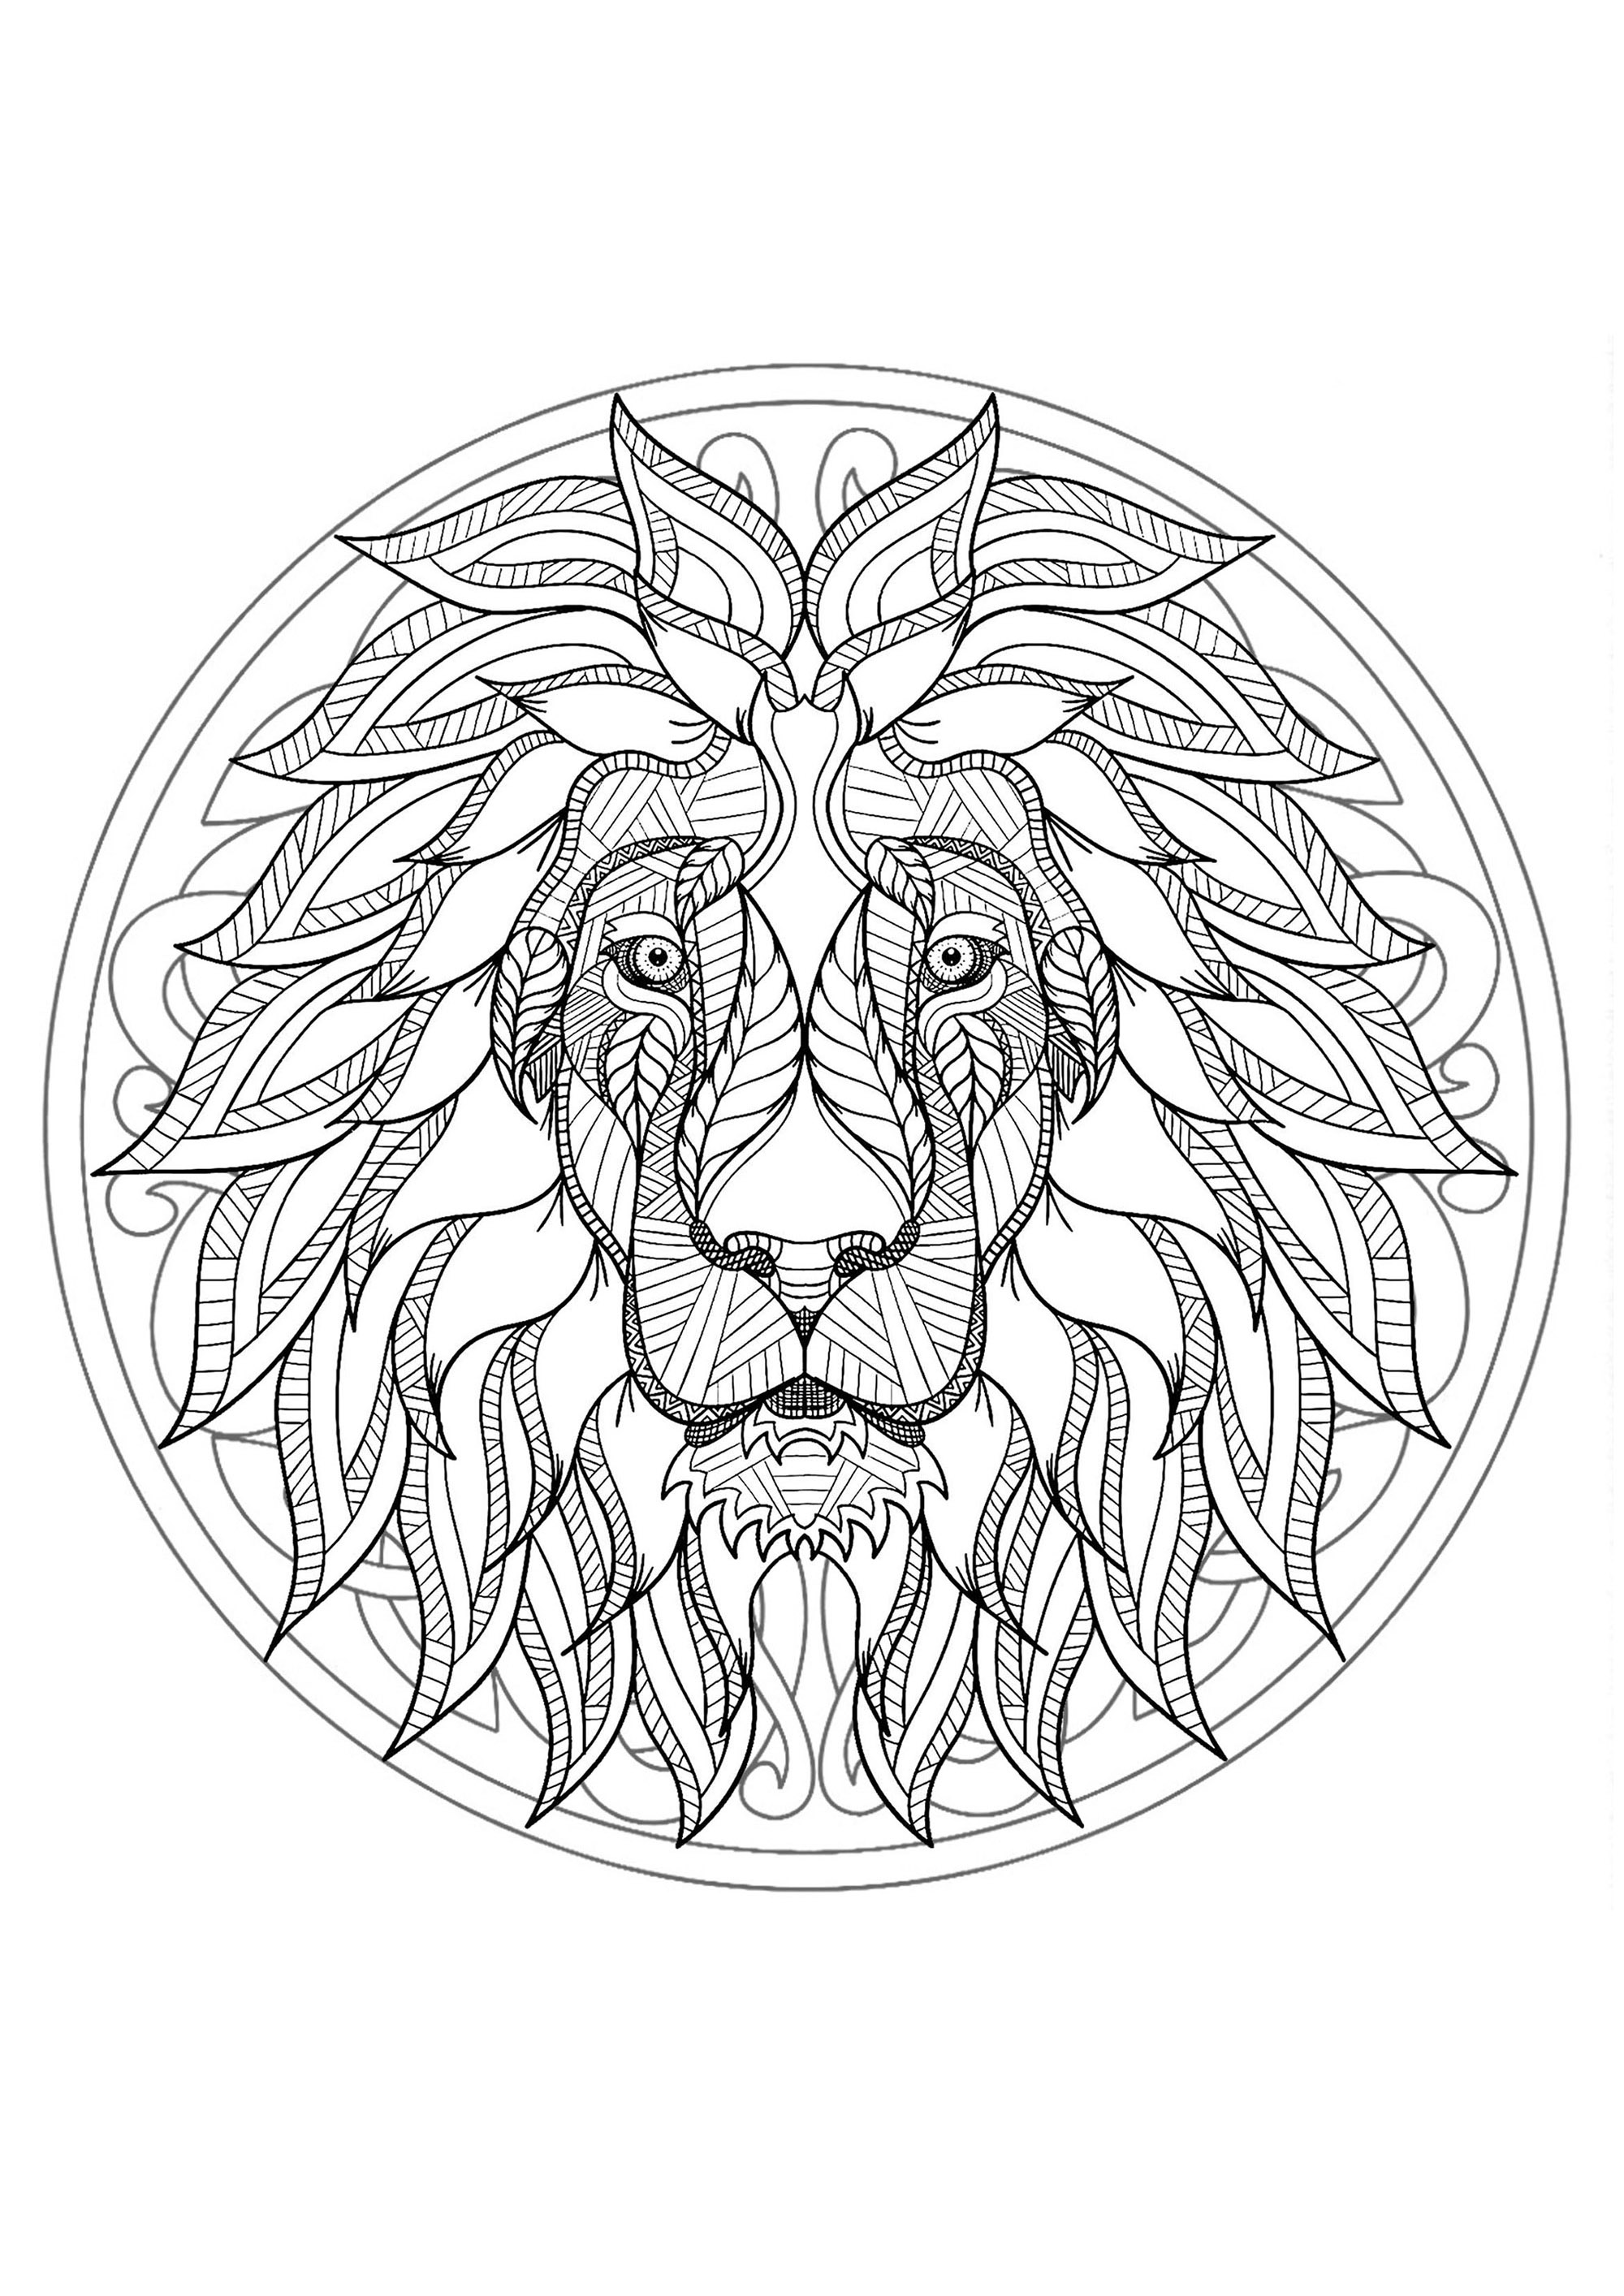 Complex Mandala coloring page with majestic Lion head - 1 - Difficult  Mandalas (for adults)